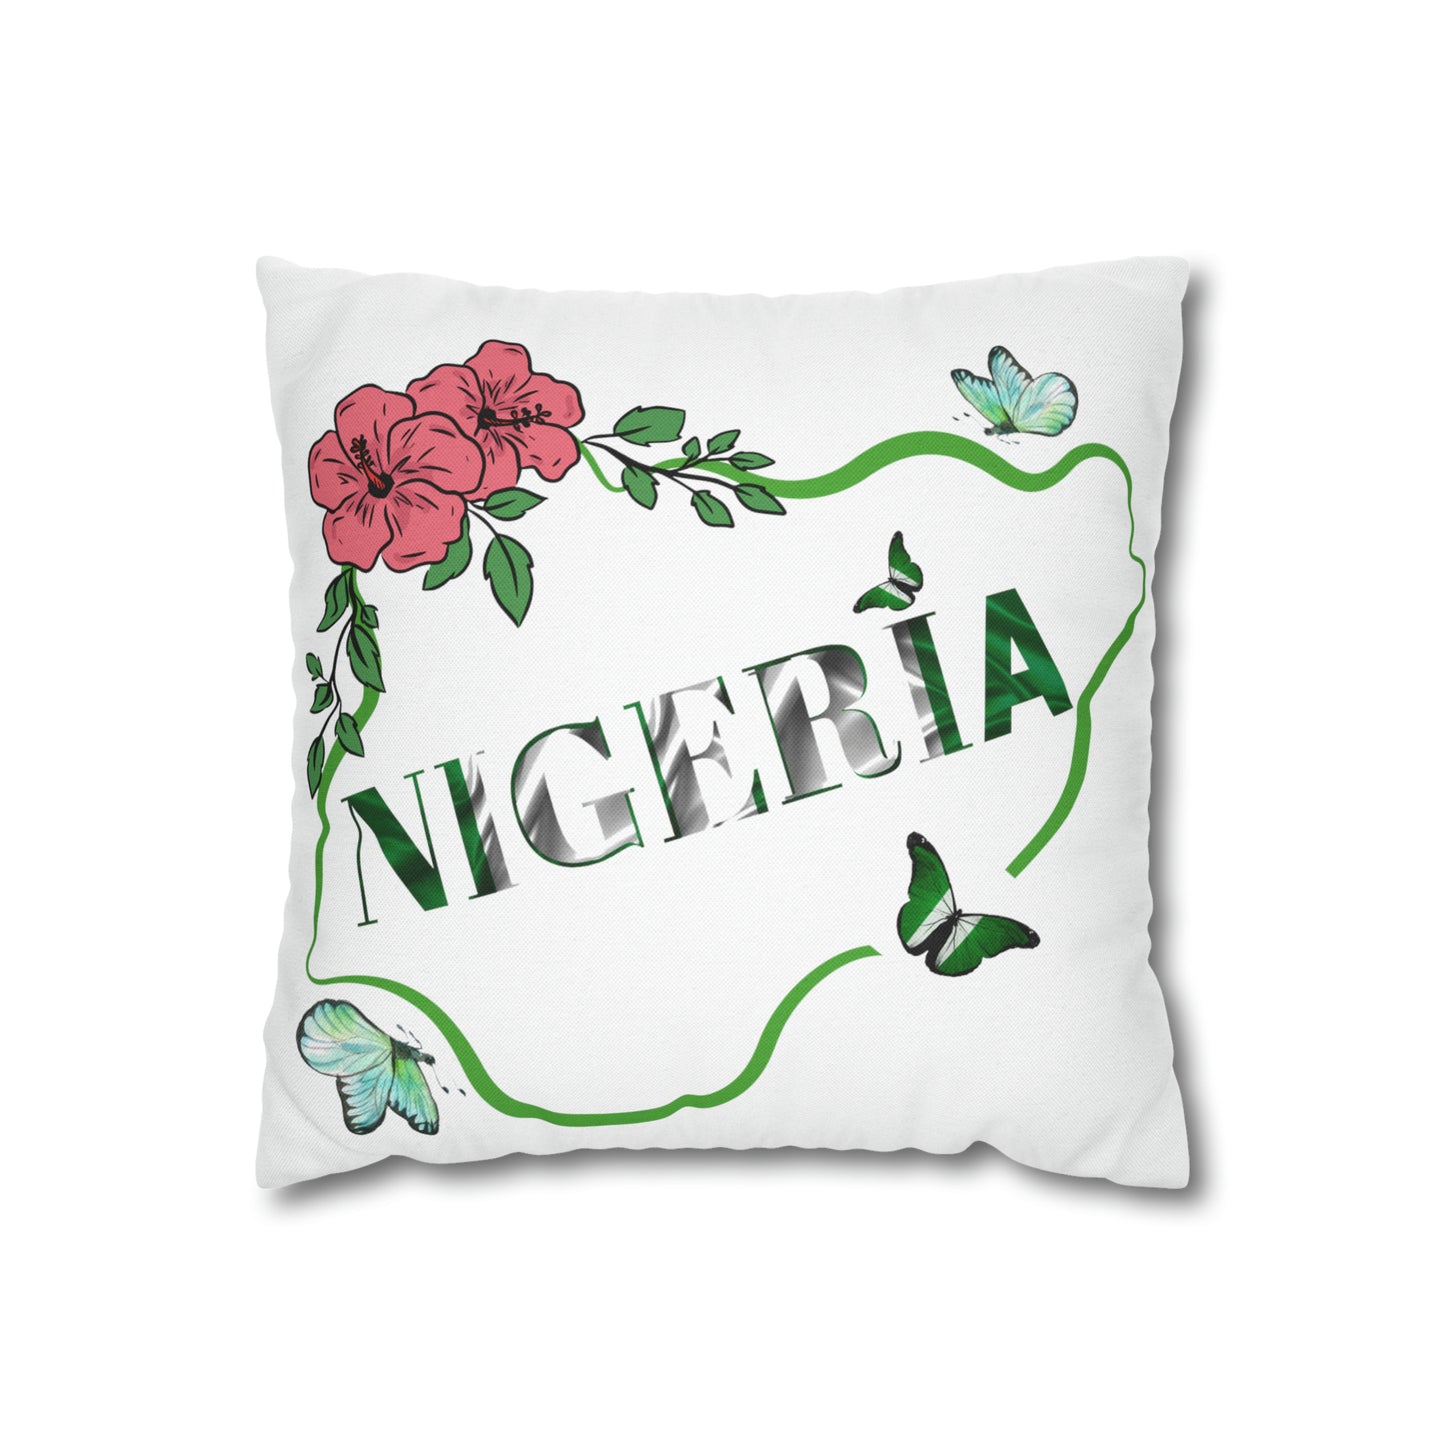 Nigeria Butterfly Spun Polyester Square Pillow Case